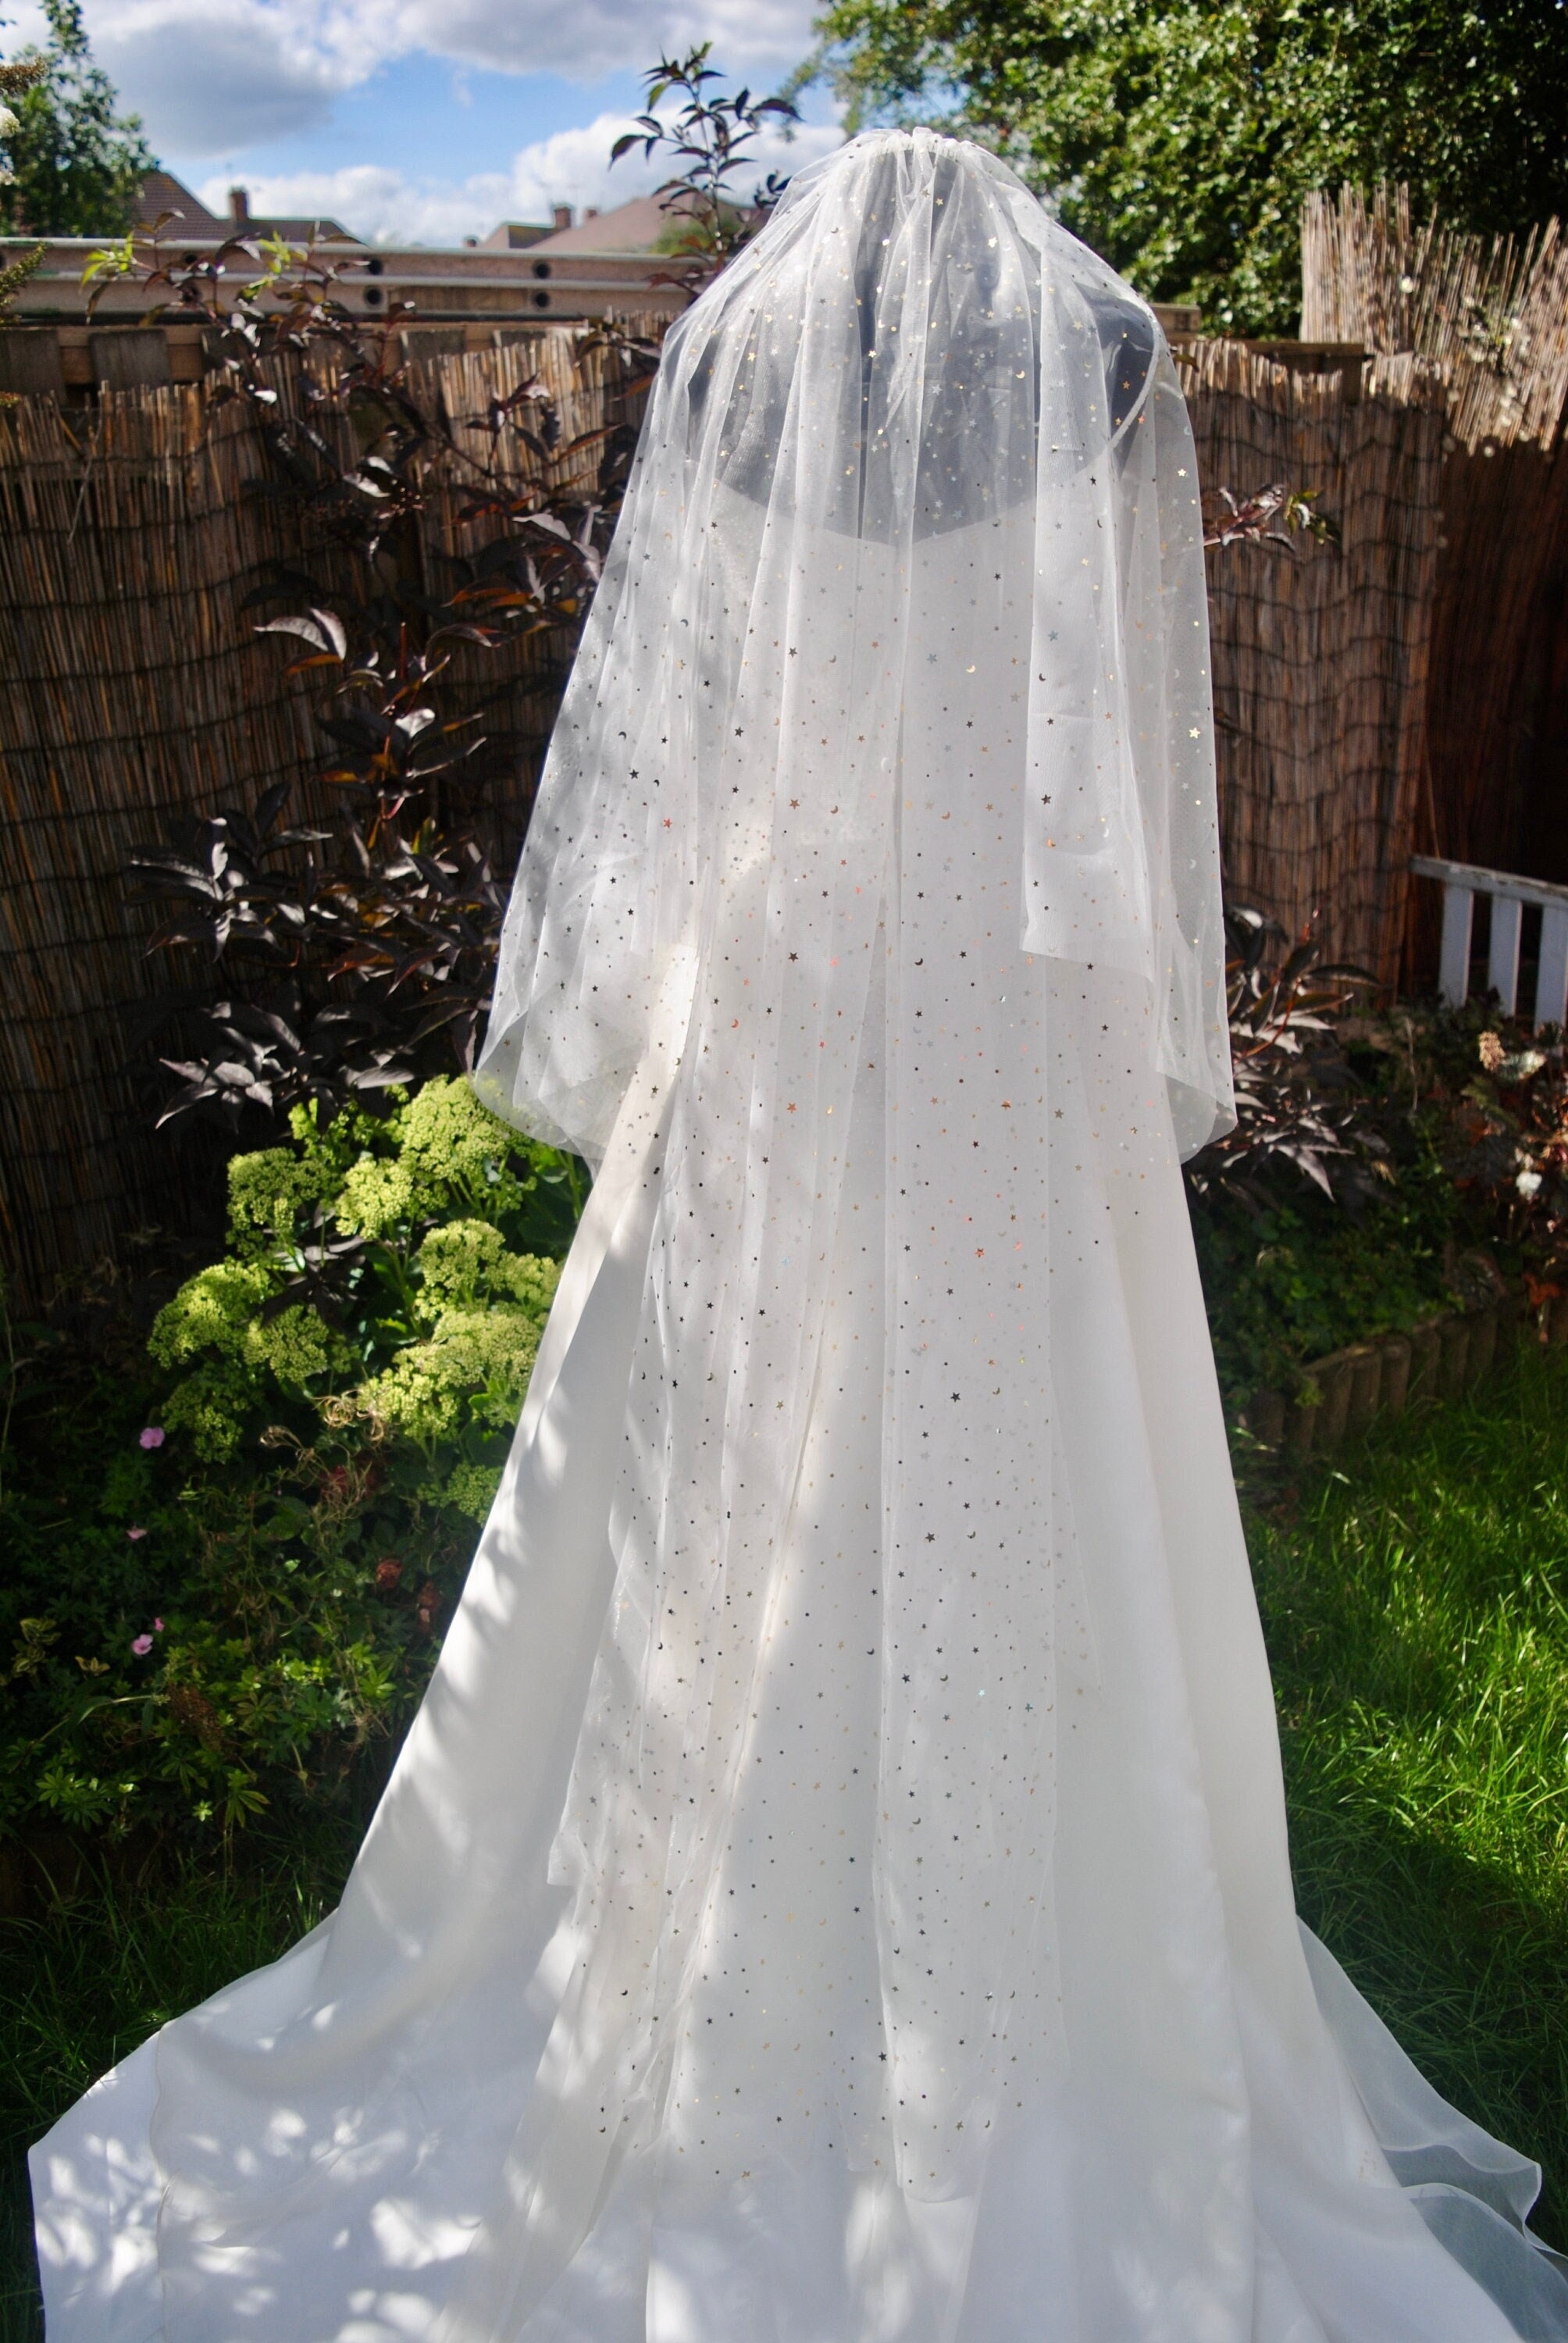 75-500cm White/Ivory Bridal Veil With Pearls Wedding Cathedral Veil Crystal  Comb